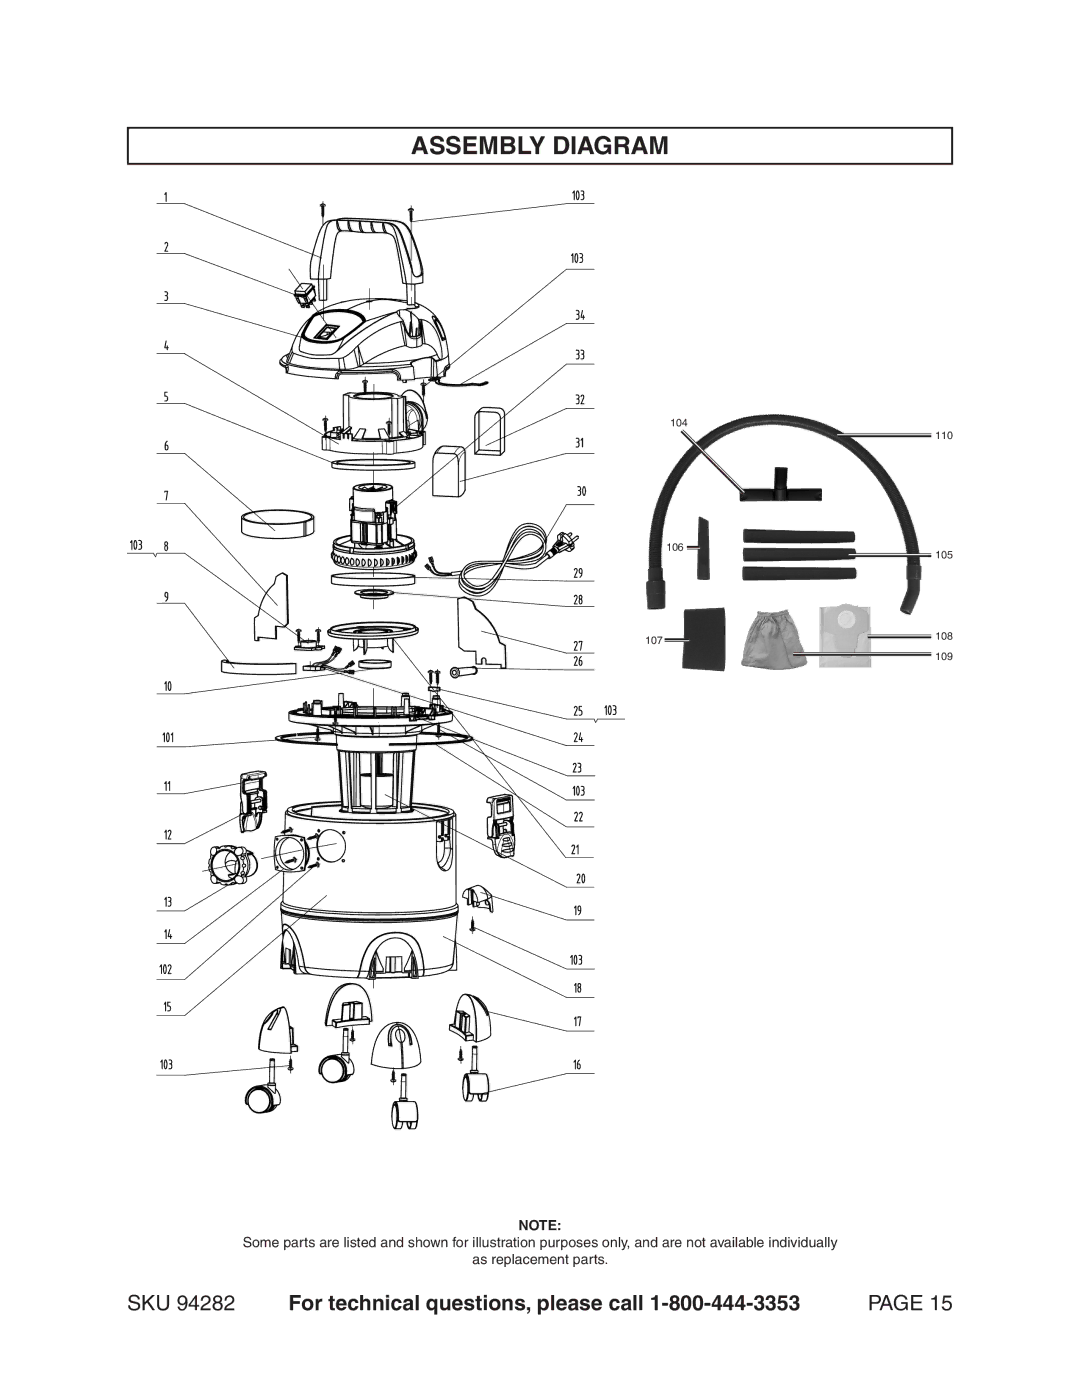 Chicago Electric 94282 manual Assembly Diagram 